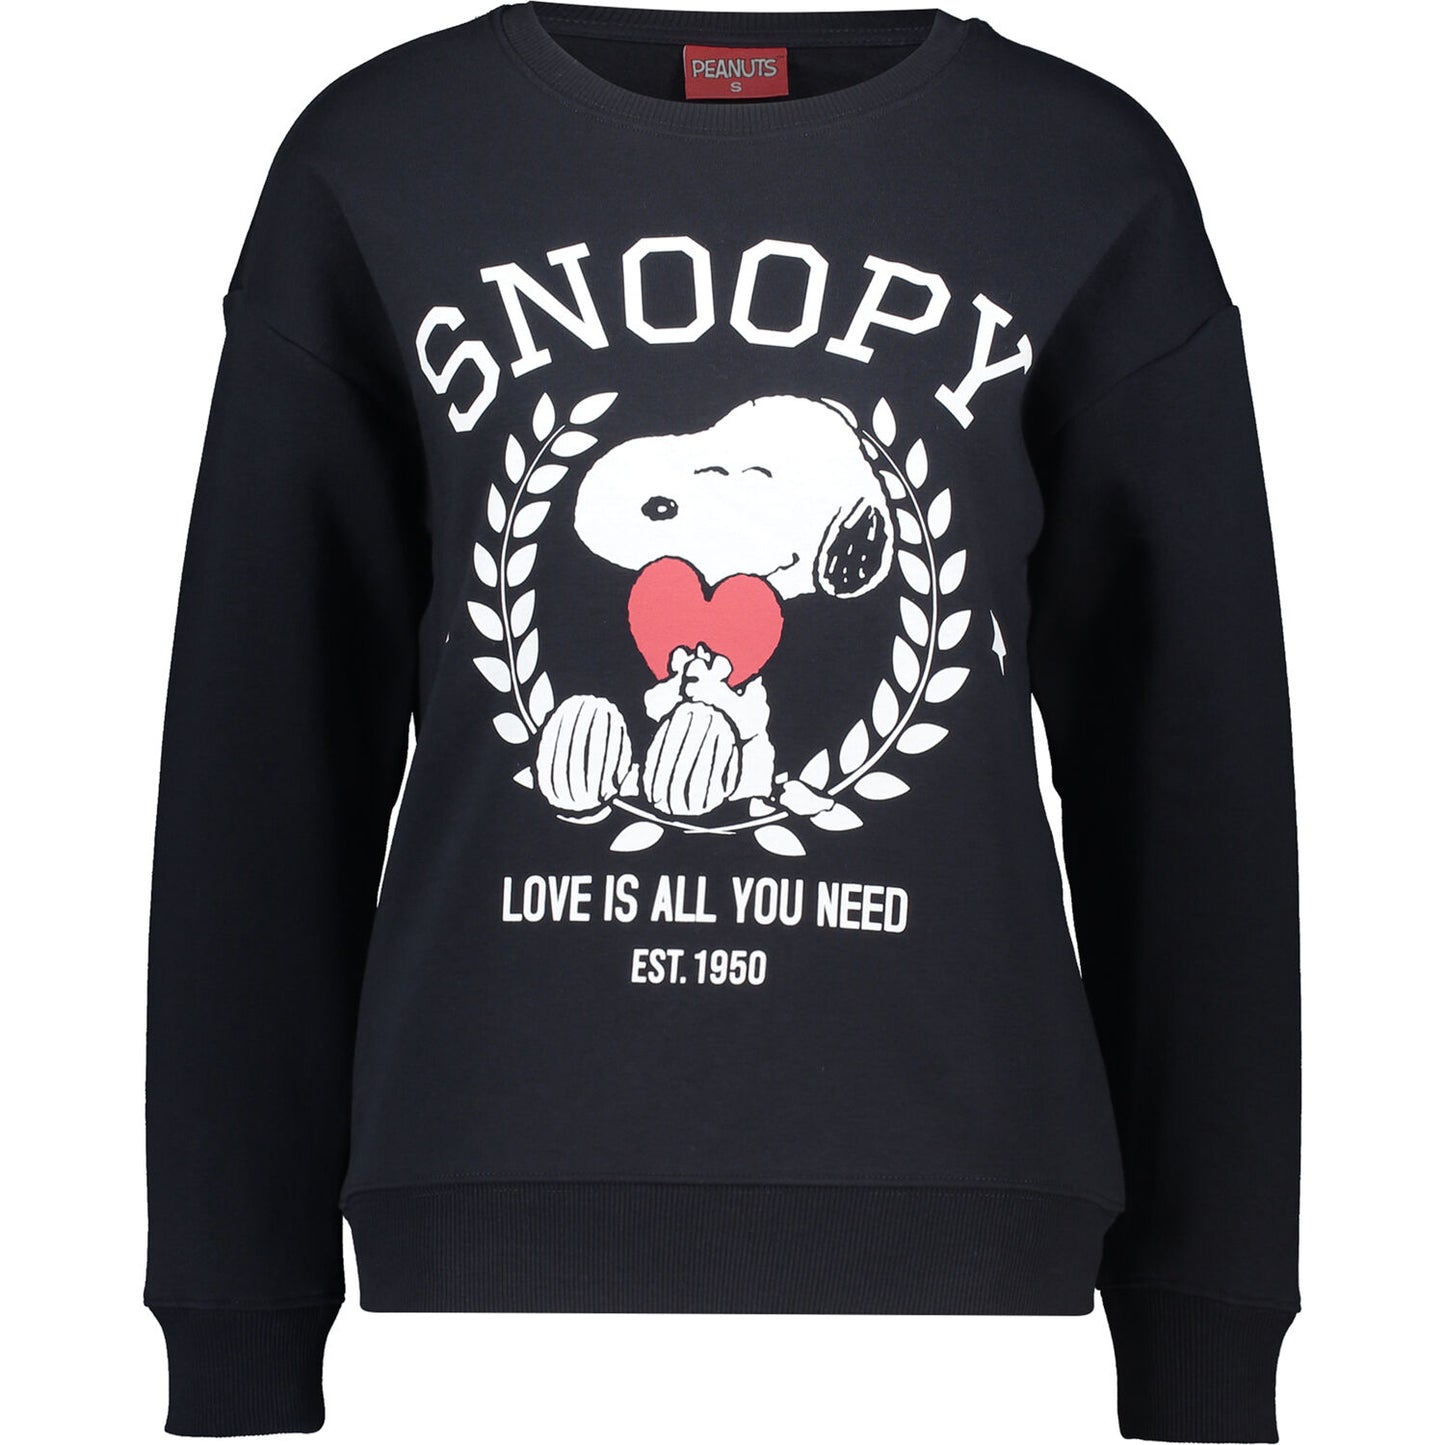 PEANUTS - LOVE IS ALL YOU NEED BE KIND CREW SWEAT AW21